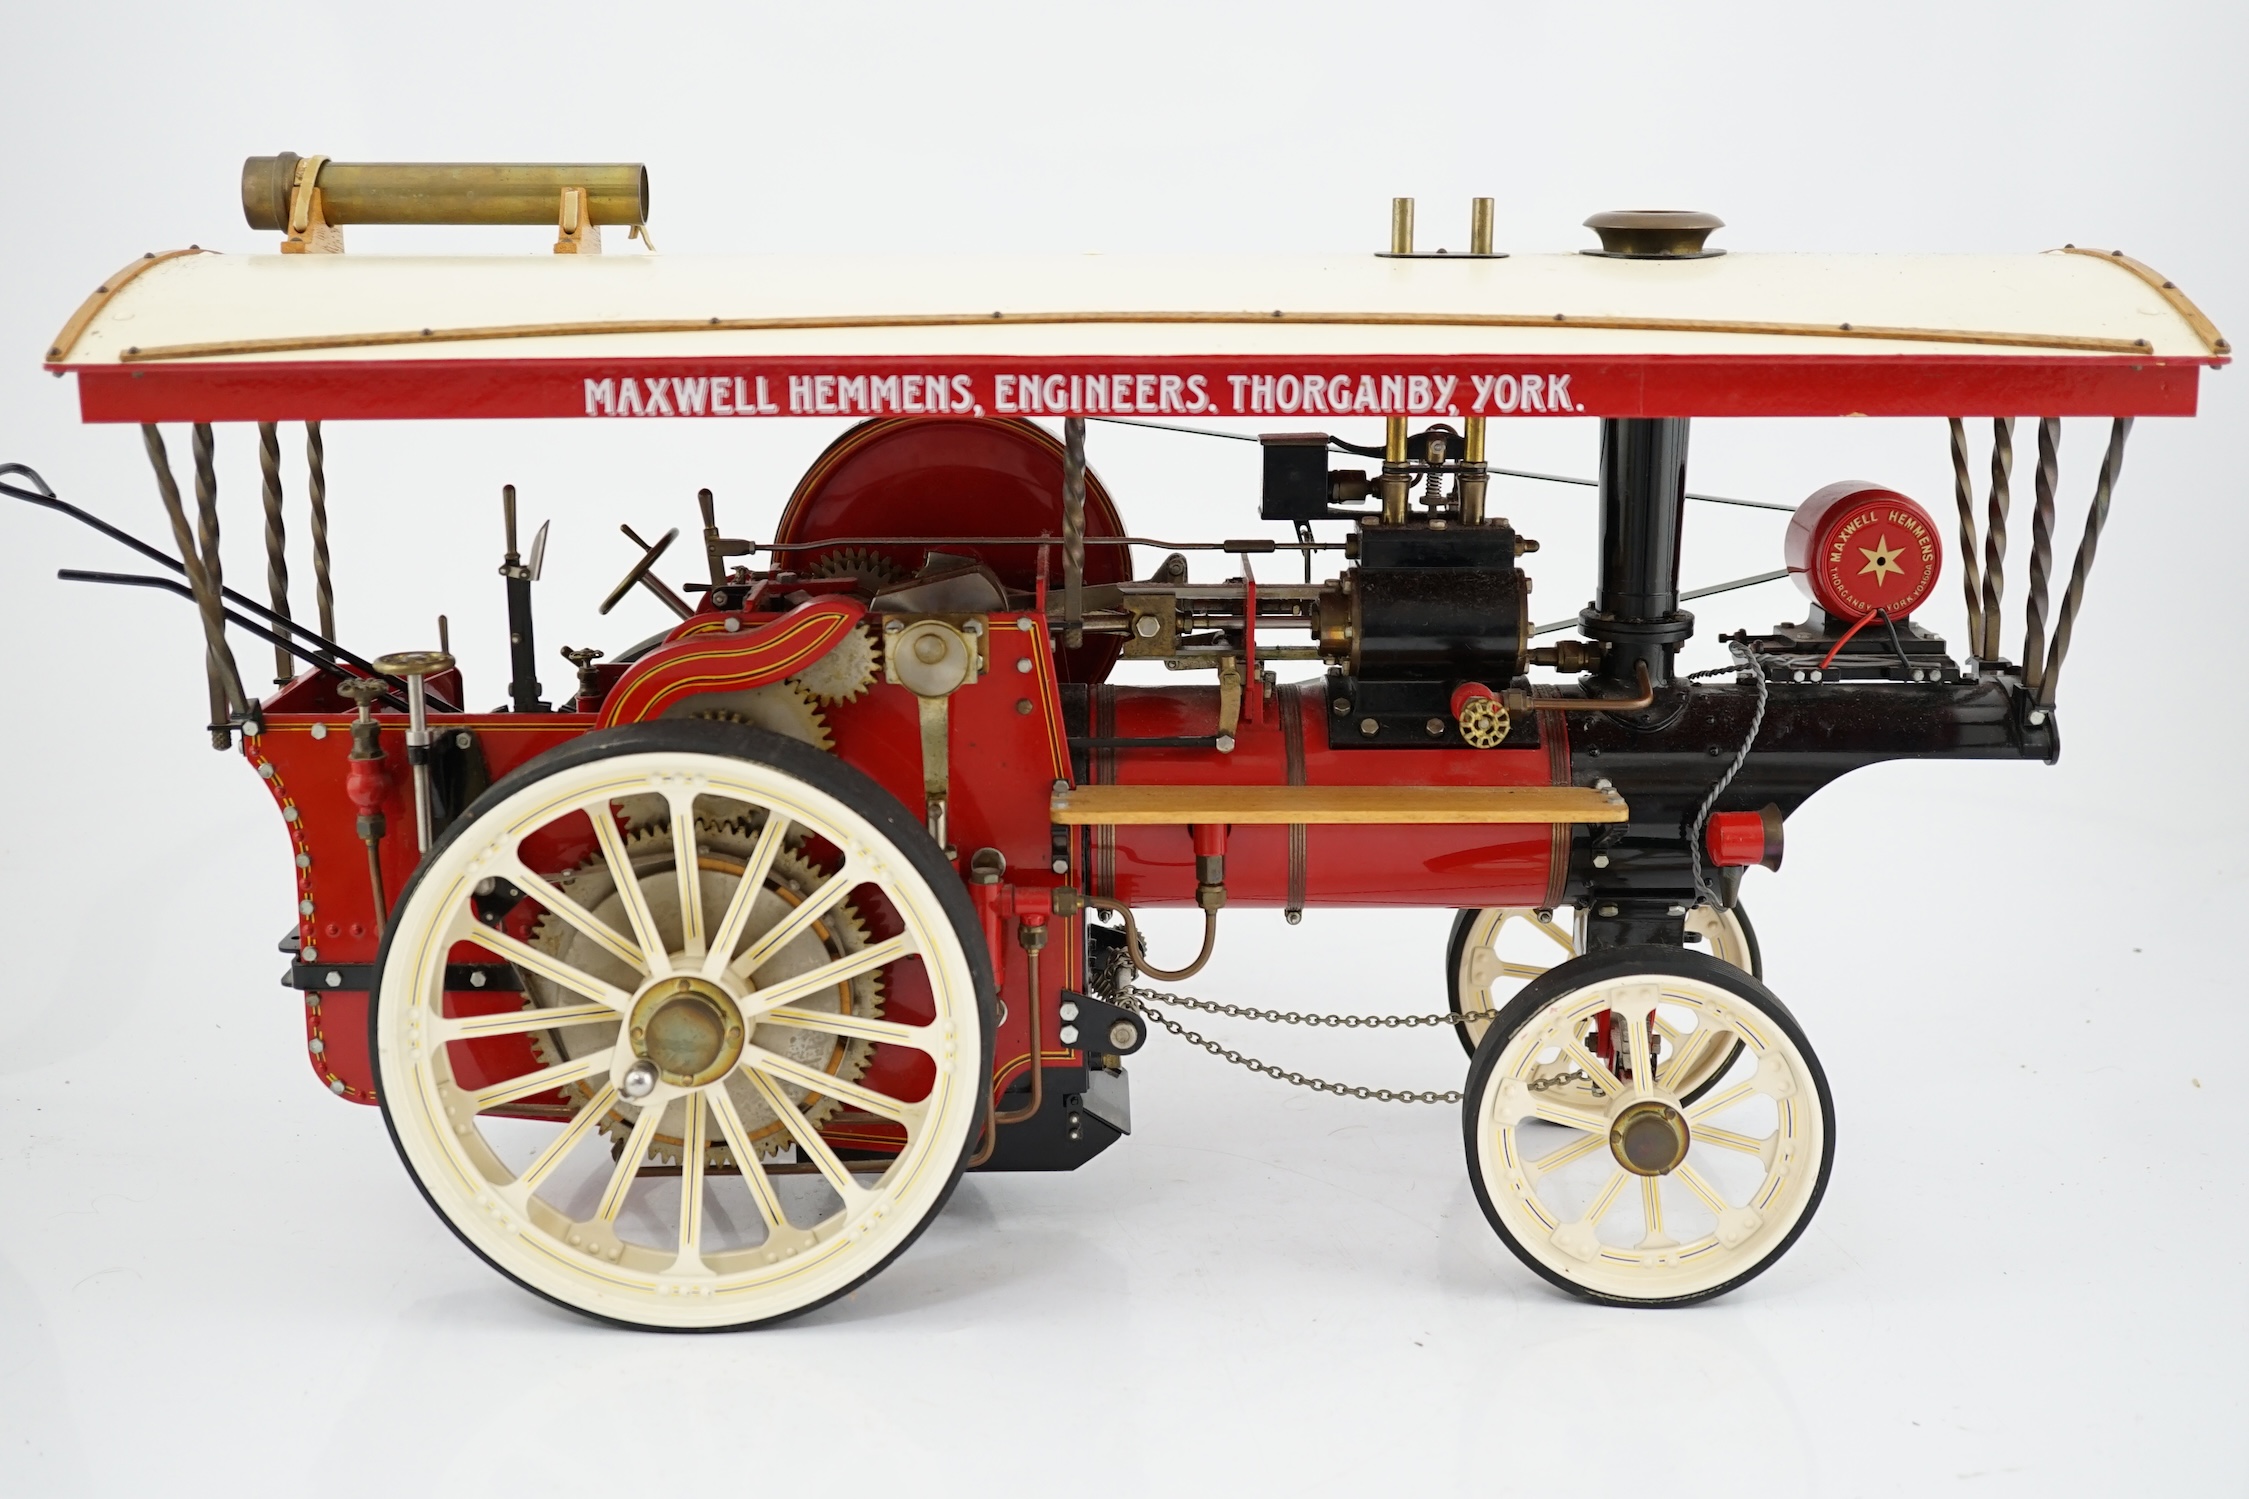 A Maxwell Hemmens one inch scale coal fired Showman's Engine.